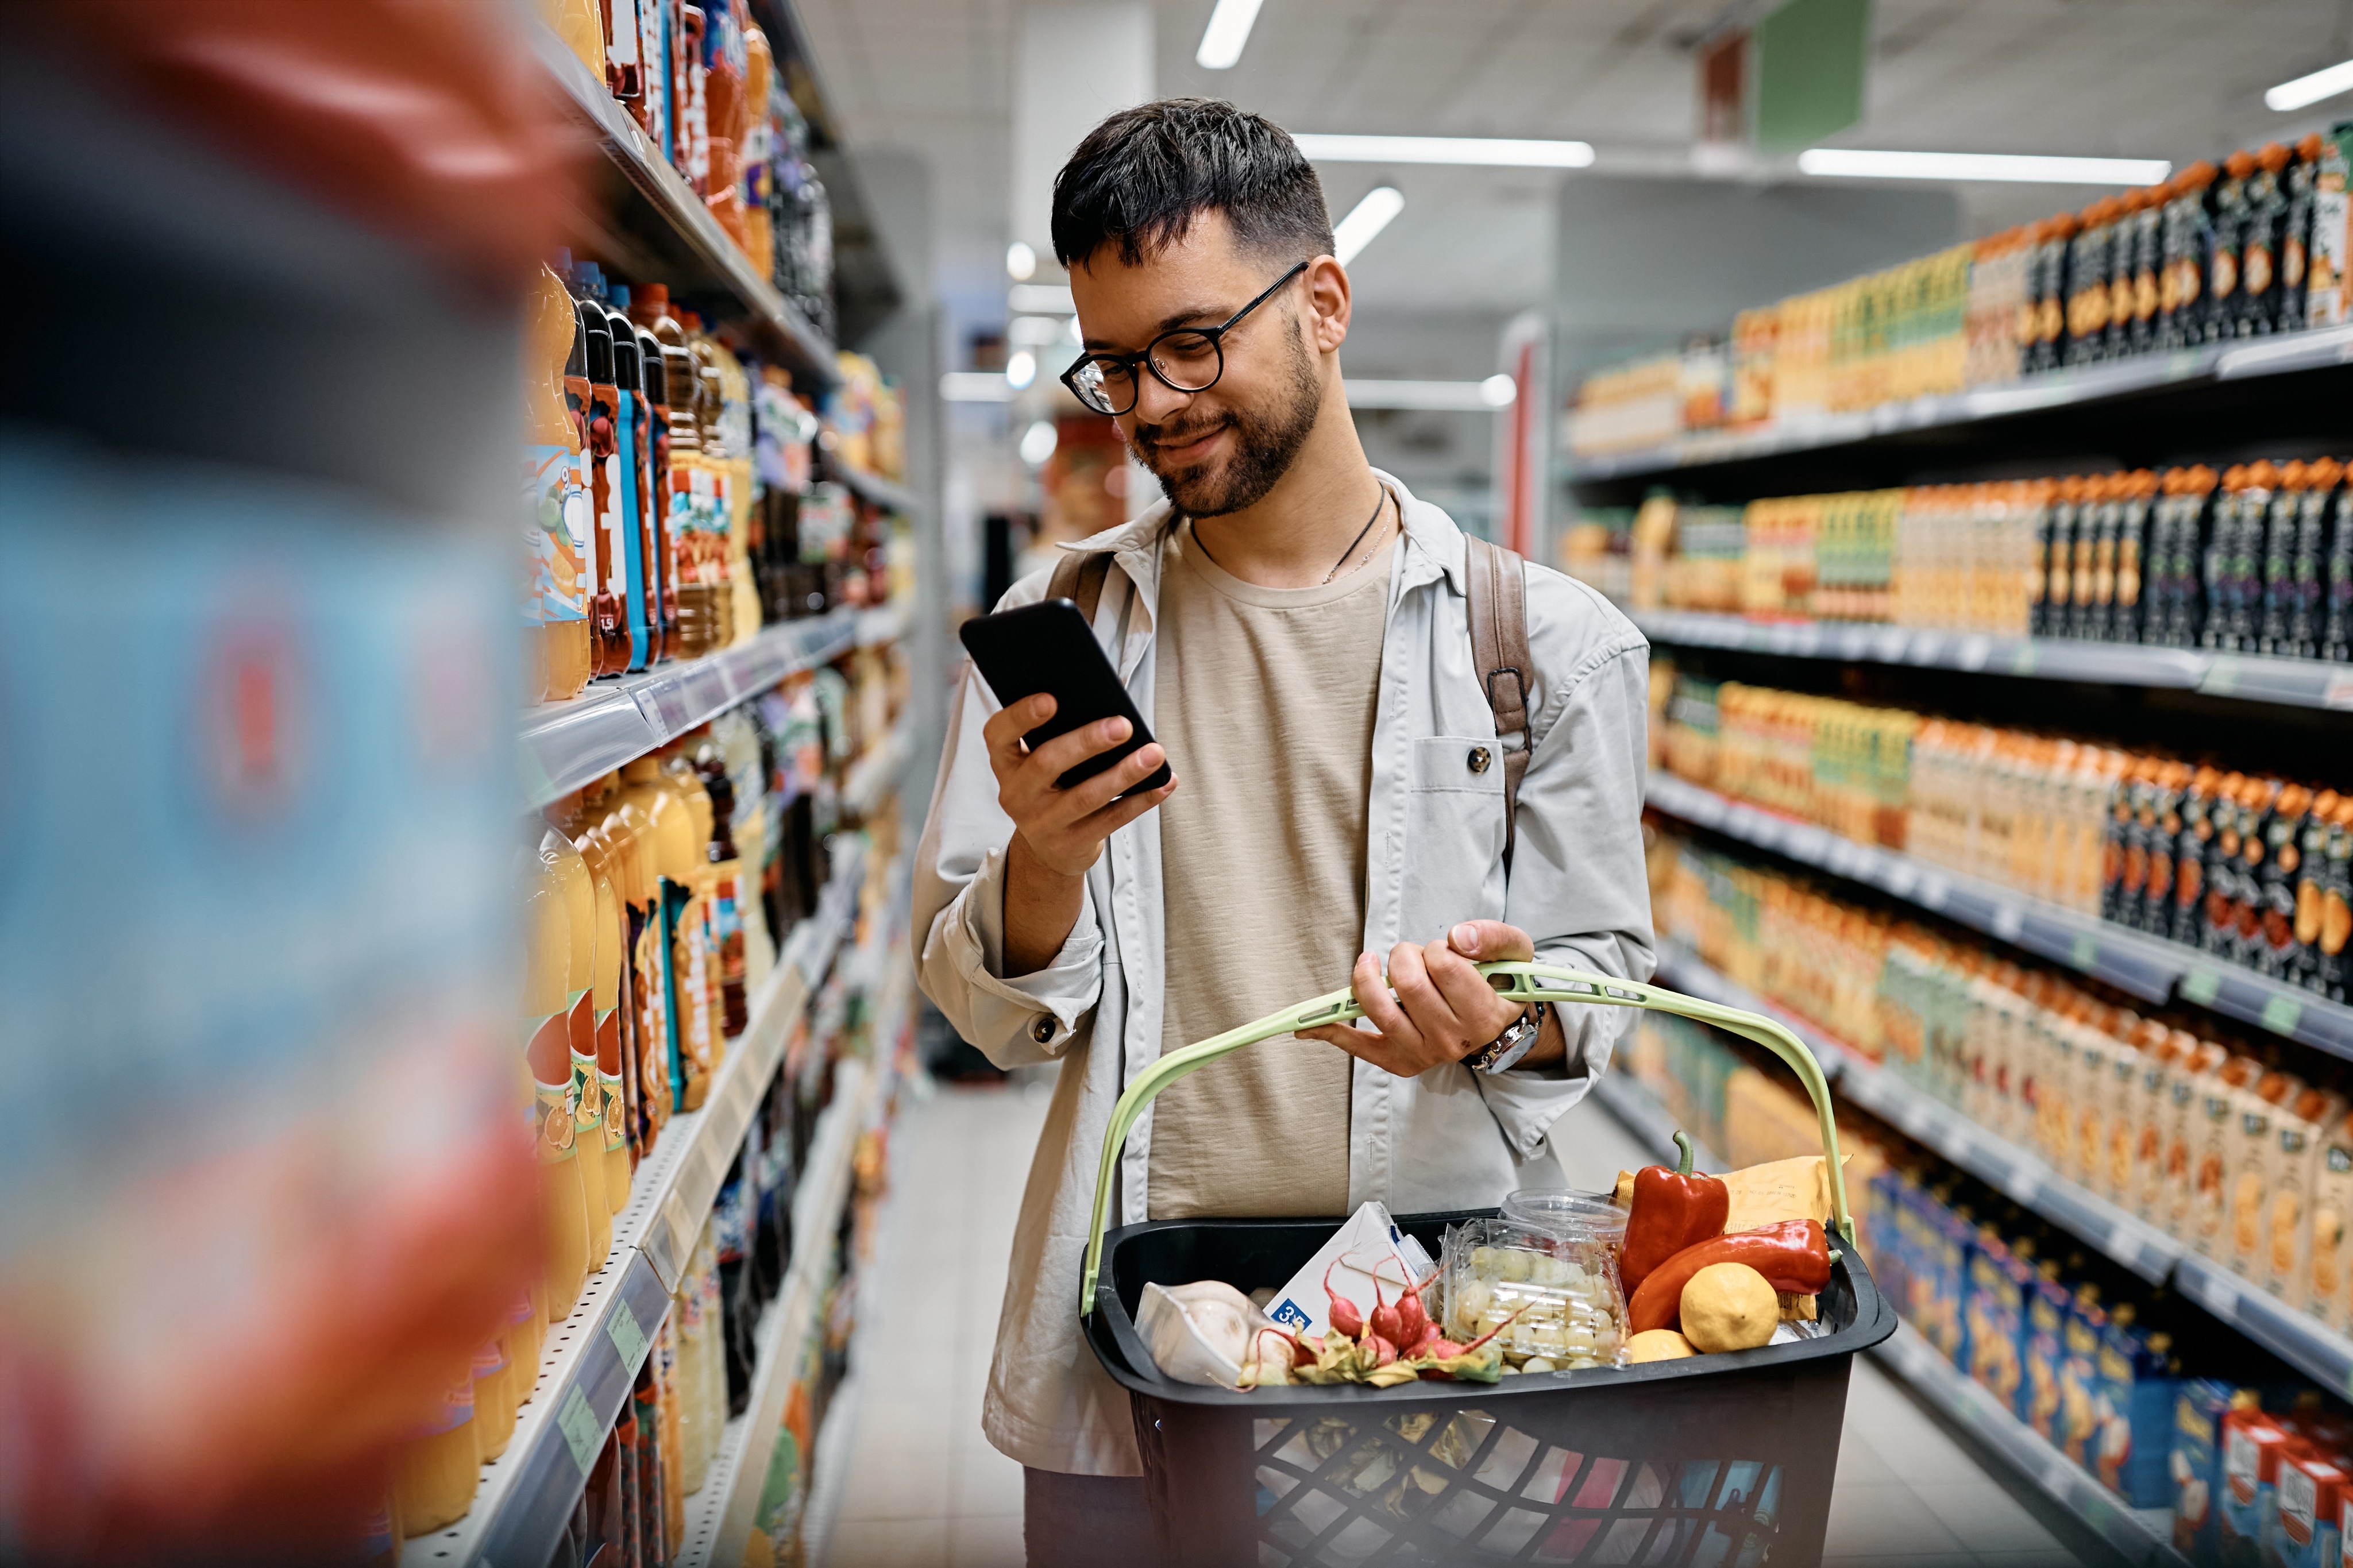 A man is smiling at his phone while holding a basket of groceries. He is standing in a food aisle of a grocery store. 